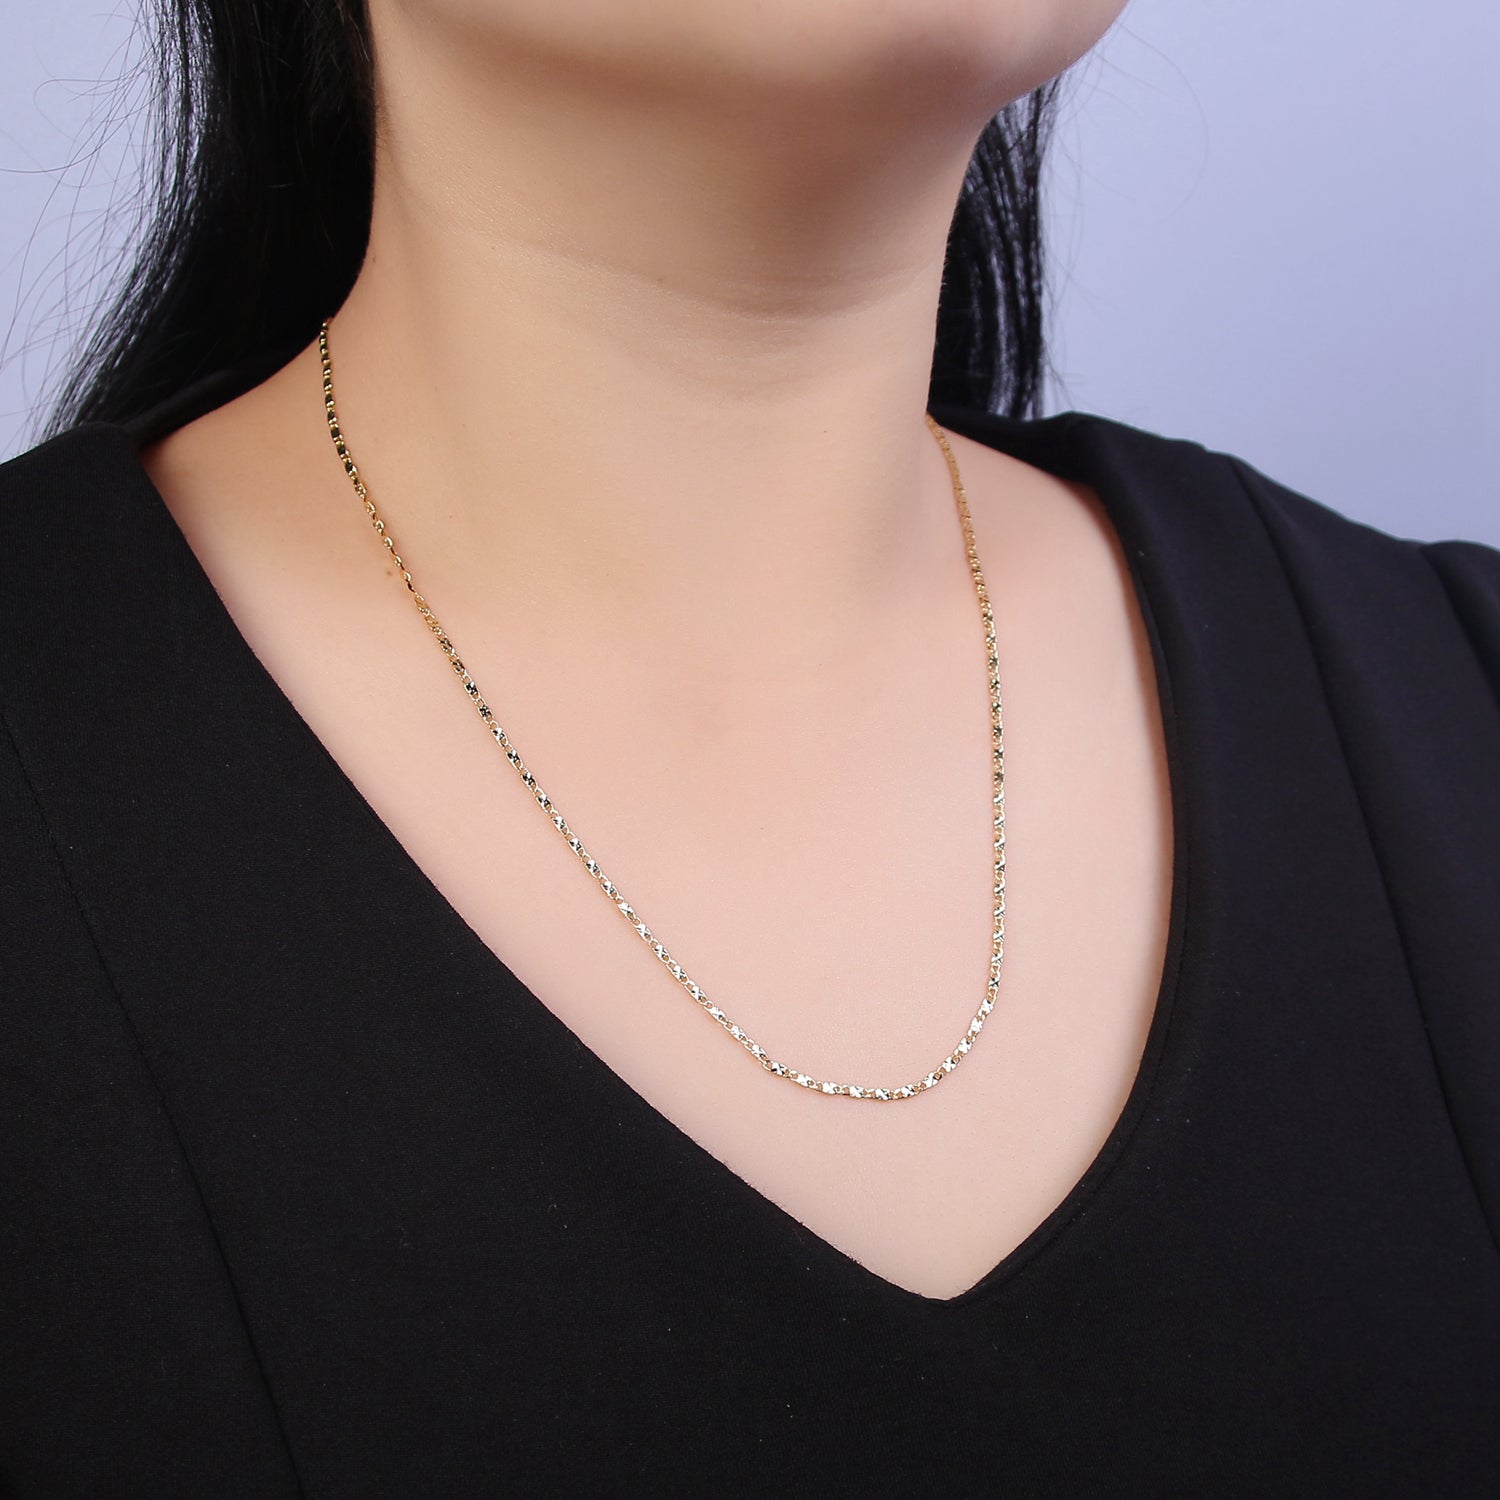 Wholesale Gold Chain Necklace, Fine Scroll Gold Chain, Simple Gold Necklace, Thin Plain Women's Necklace 18" 20" Women Chain - DLUXCA